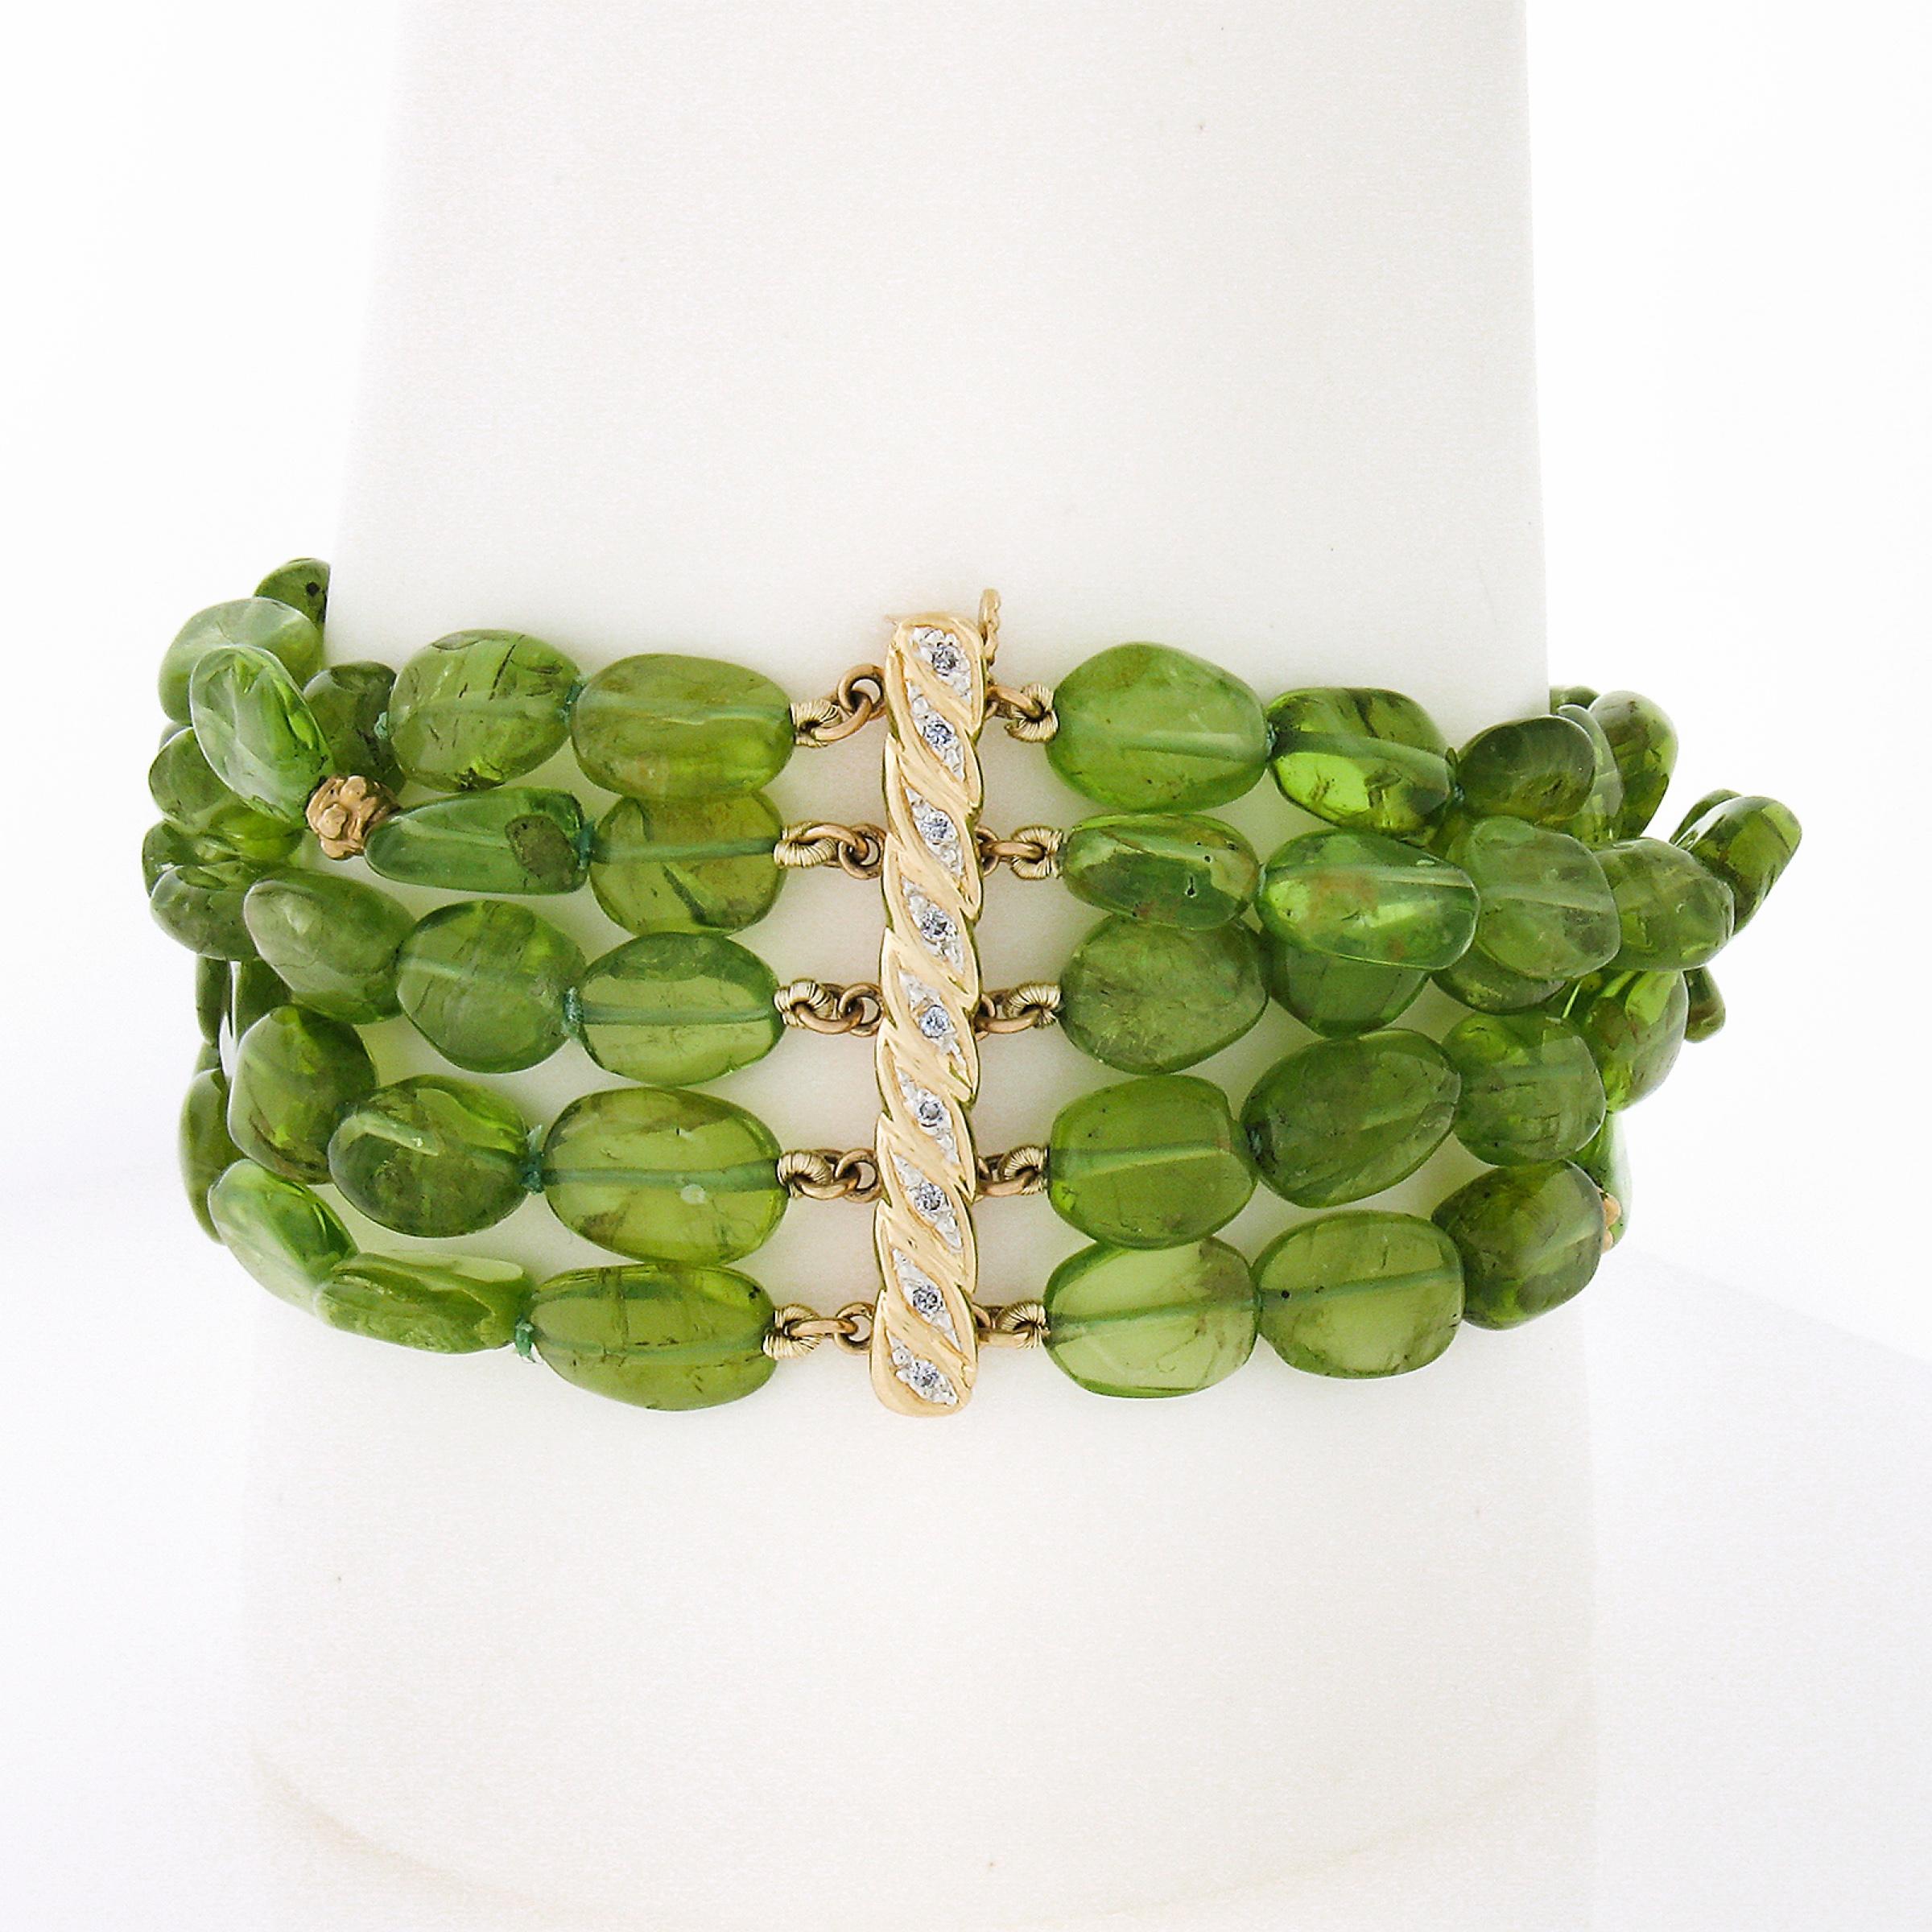 This absolutely beautiful bracelet features 5 strands of tumbled bean shape peridot with bead spacers and push clasp that are crafted from solid 14k yellow gold. The peridots showing a happy and bright lime green color and have a truly wonderful 